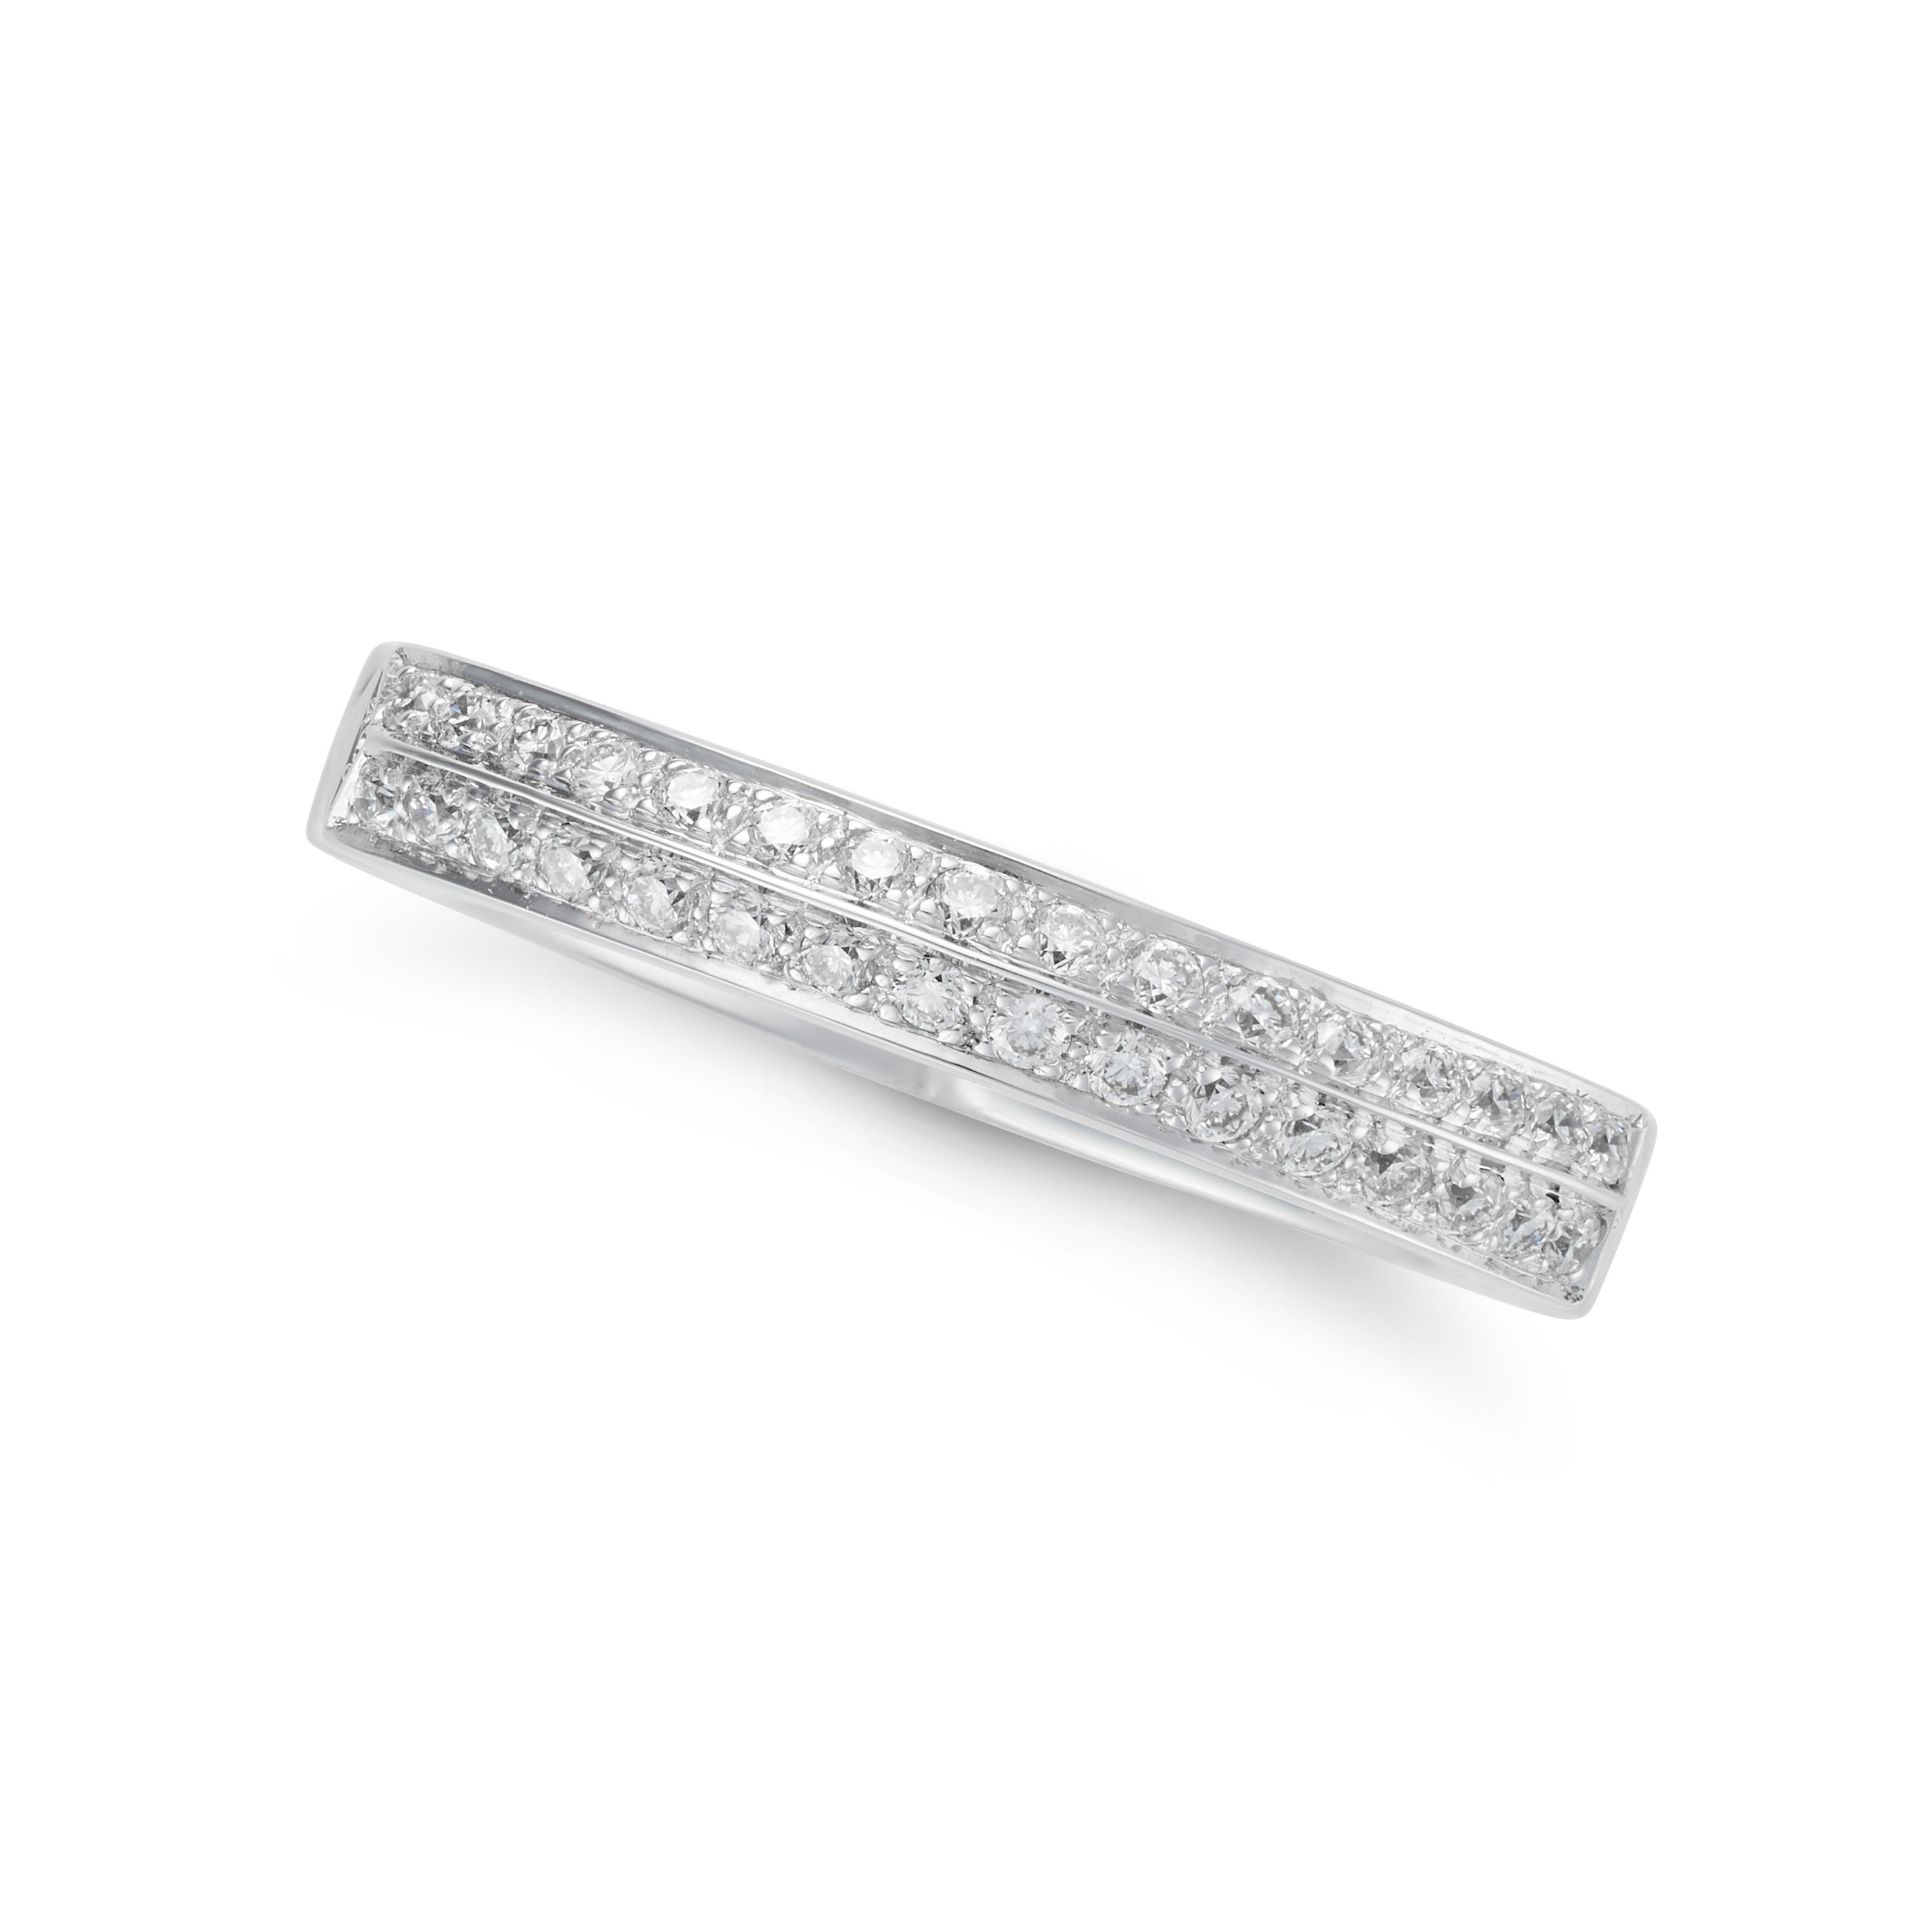 STEPHEN WEBSTER, A DIAMOND HALF ETERNITY RING in 18ct white gold, the stylised band pave set with...